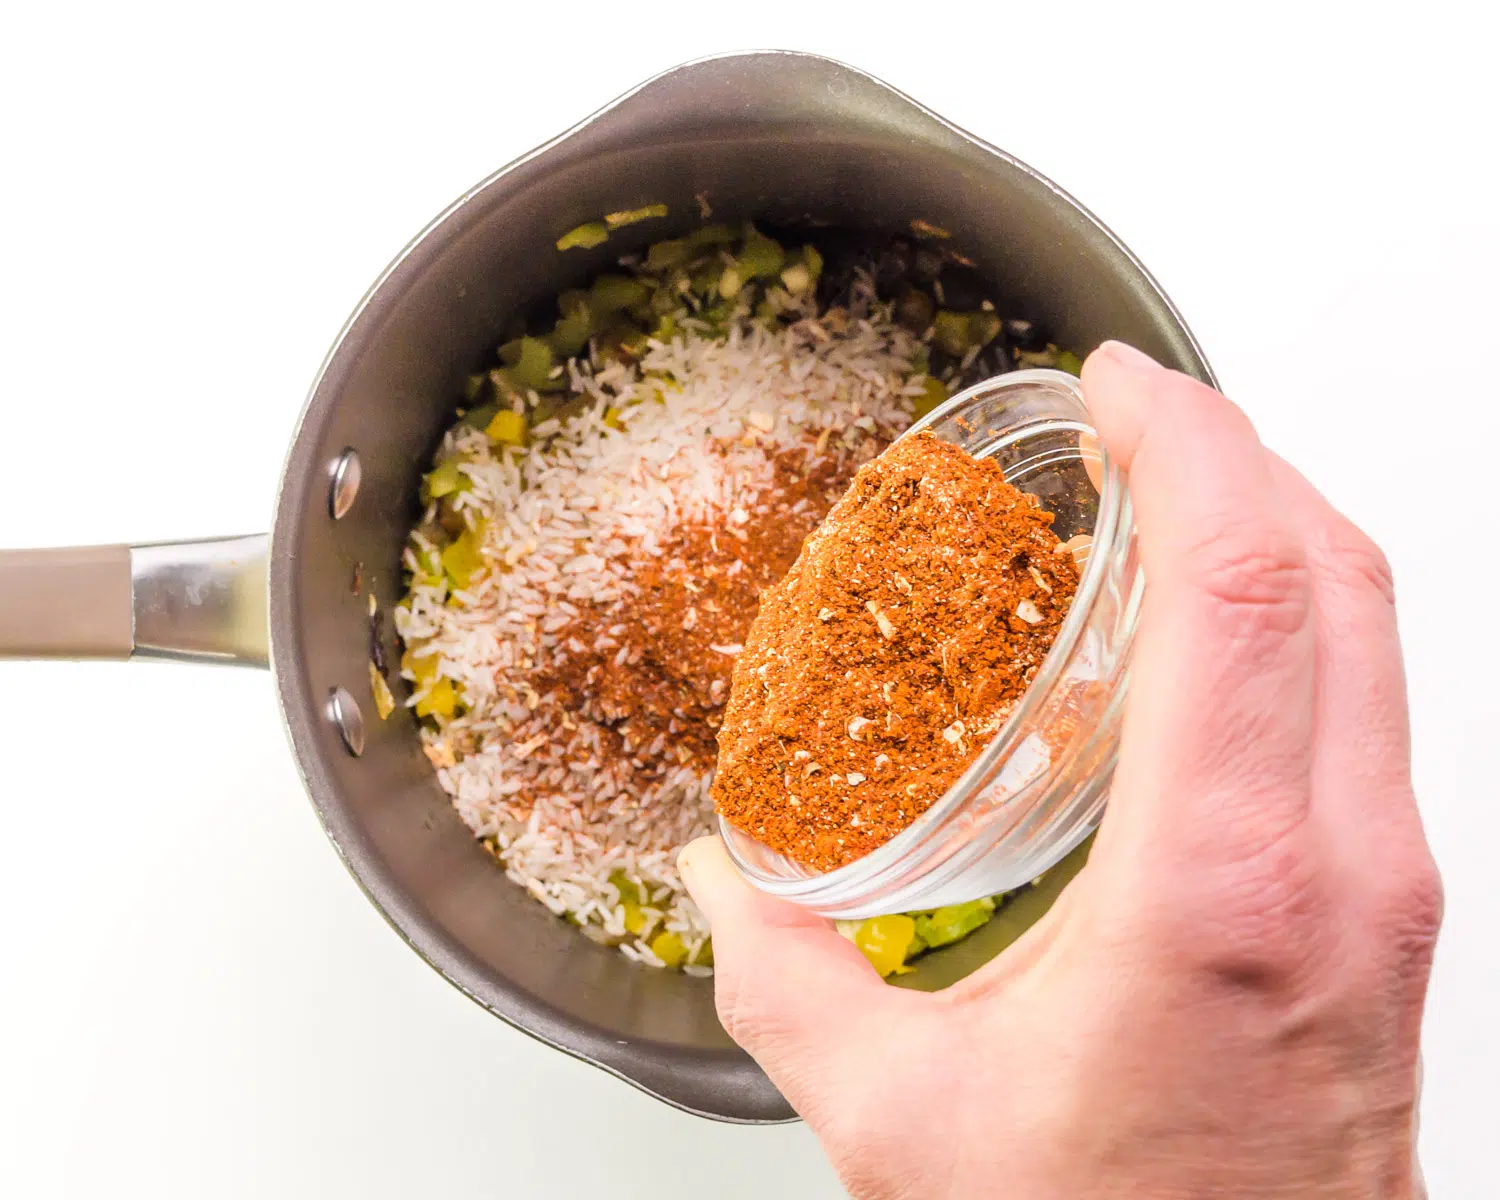 A hand holds a bowl of cajun seasoning, pouring it into a saucepan.